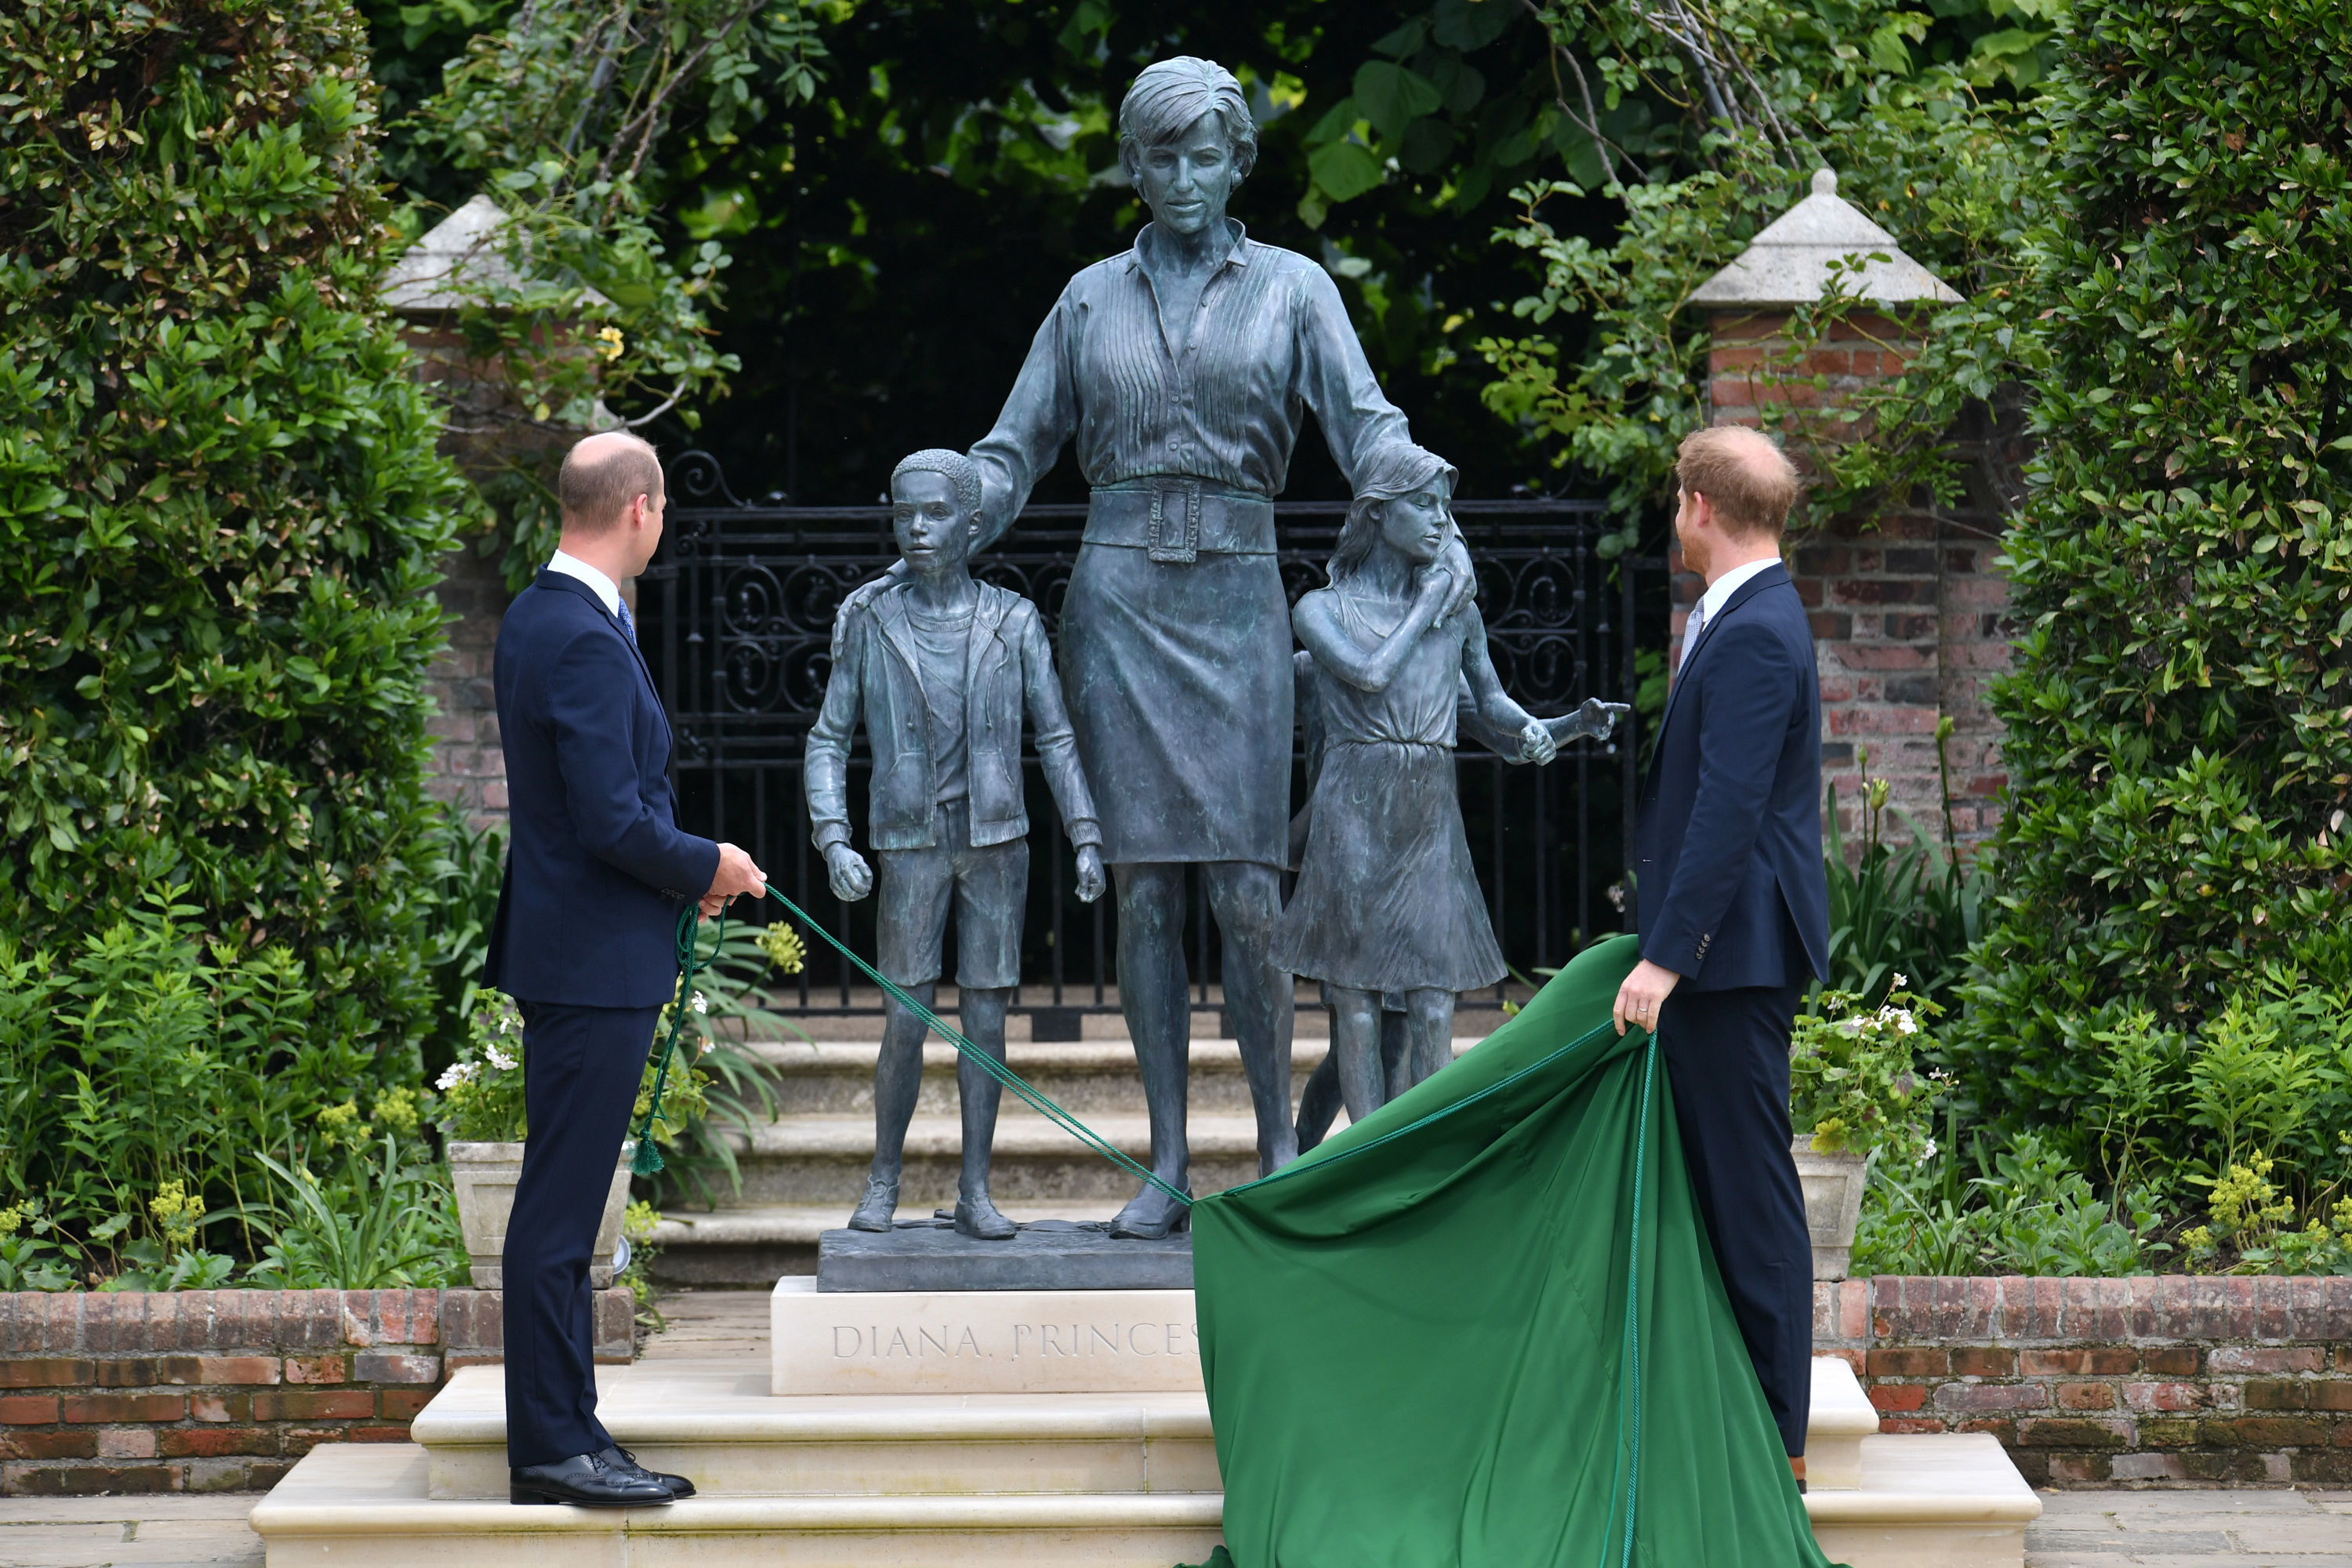 Prince William and Prince Harry wearing dark blue suits as they unveil the statue of their mother Princess Diana at Kensington Palace